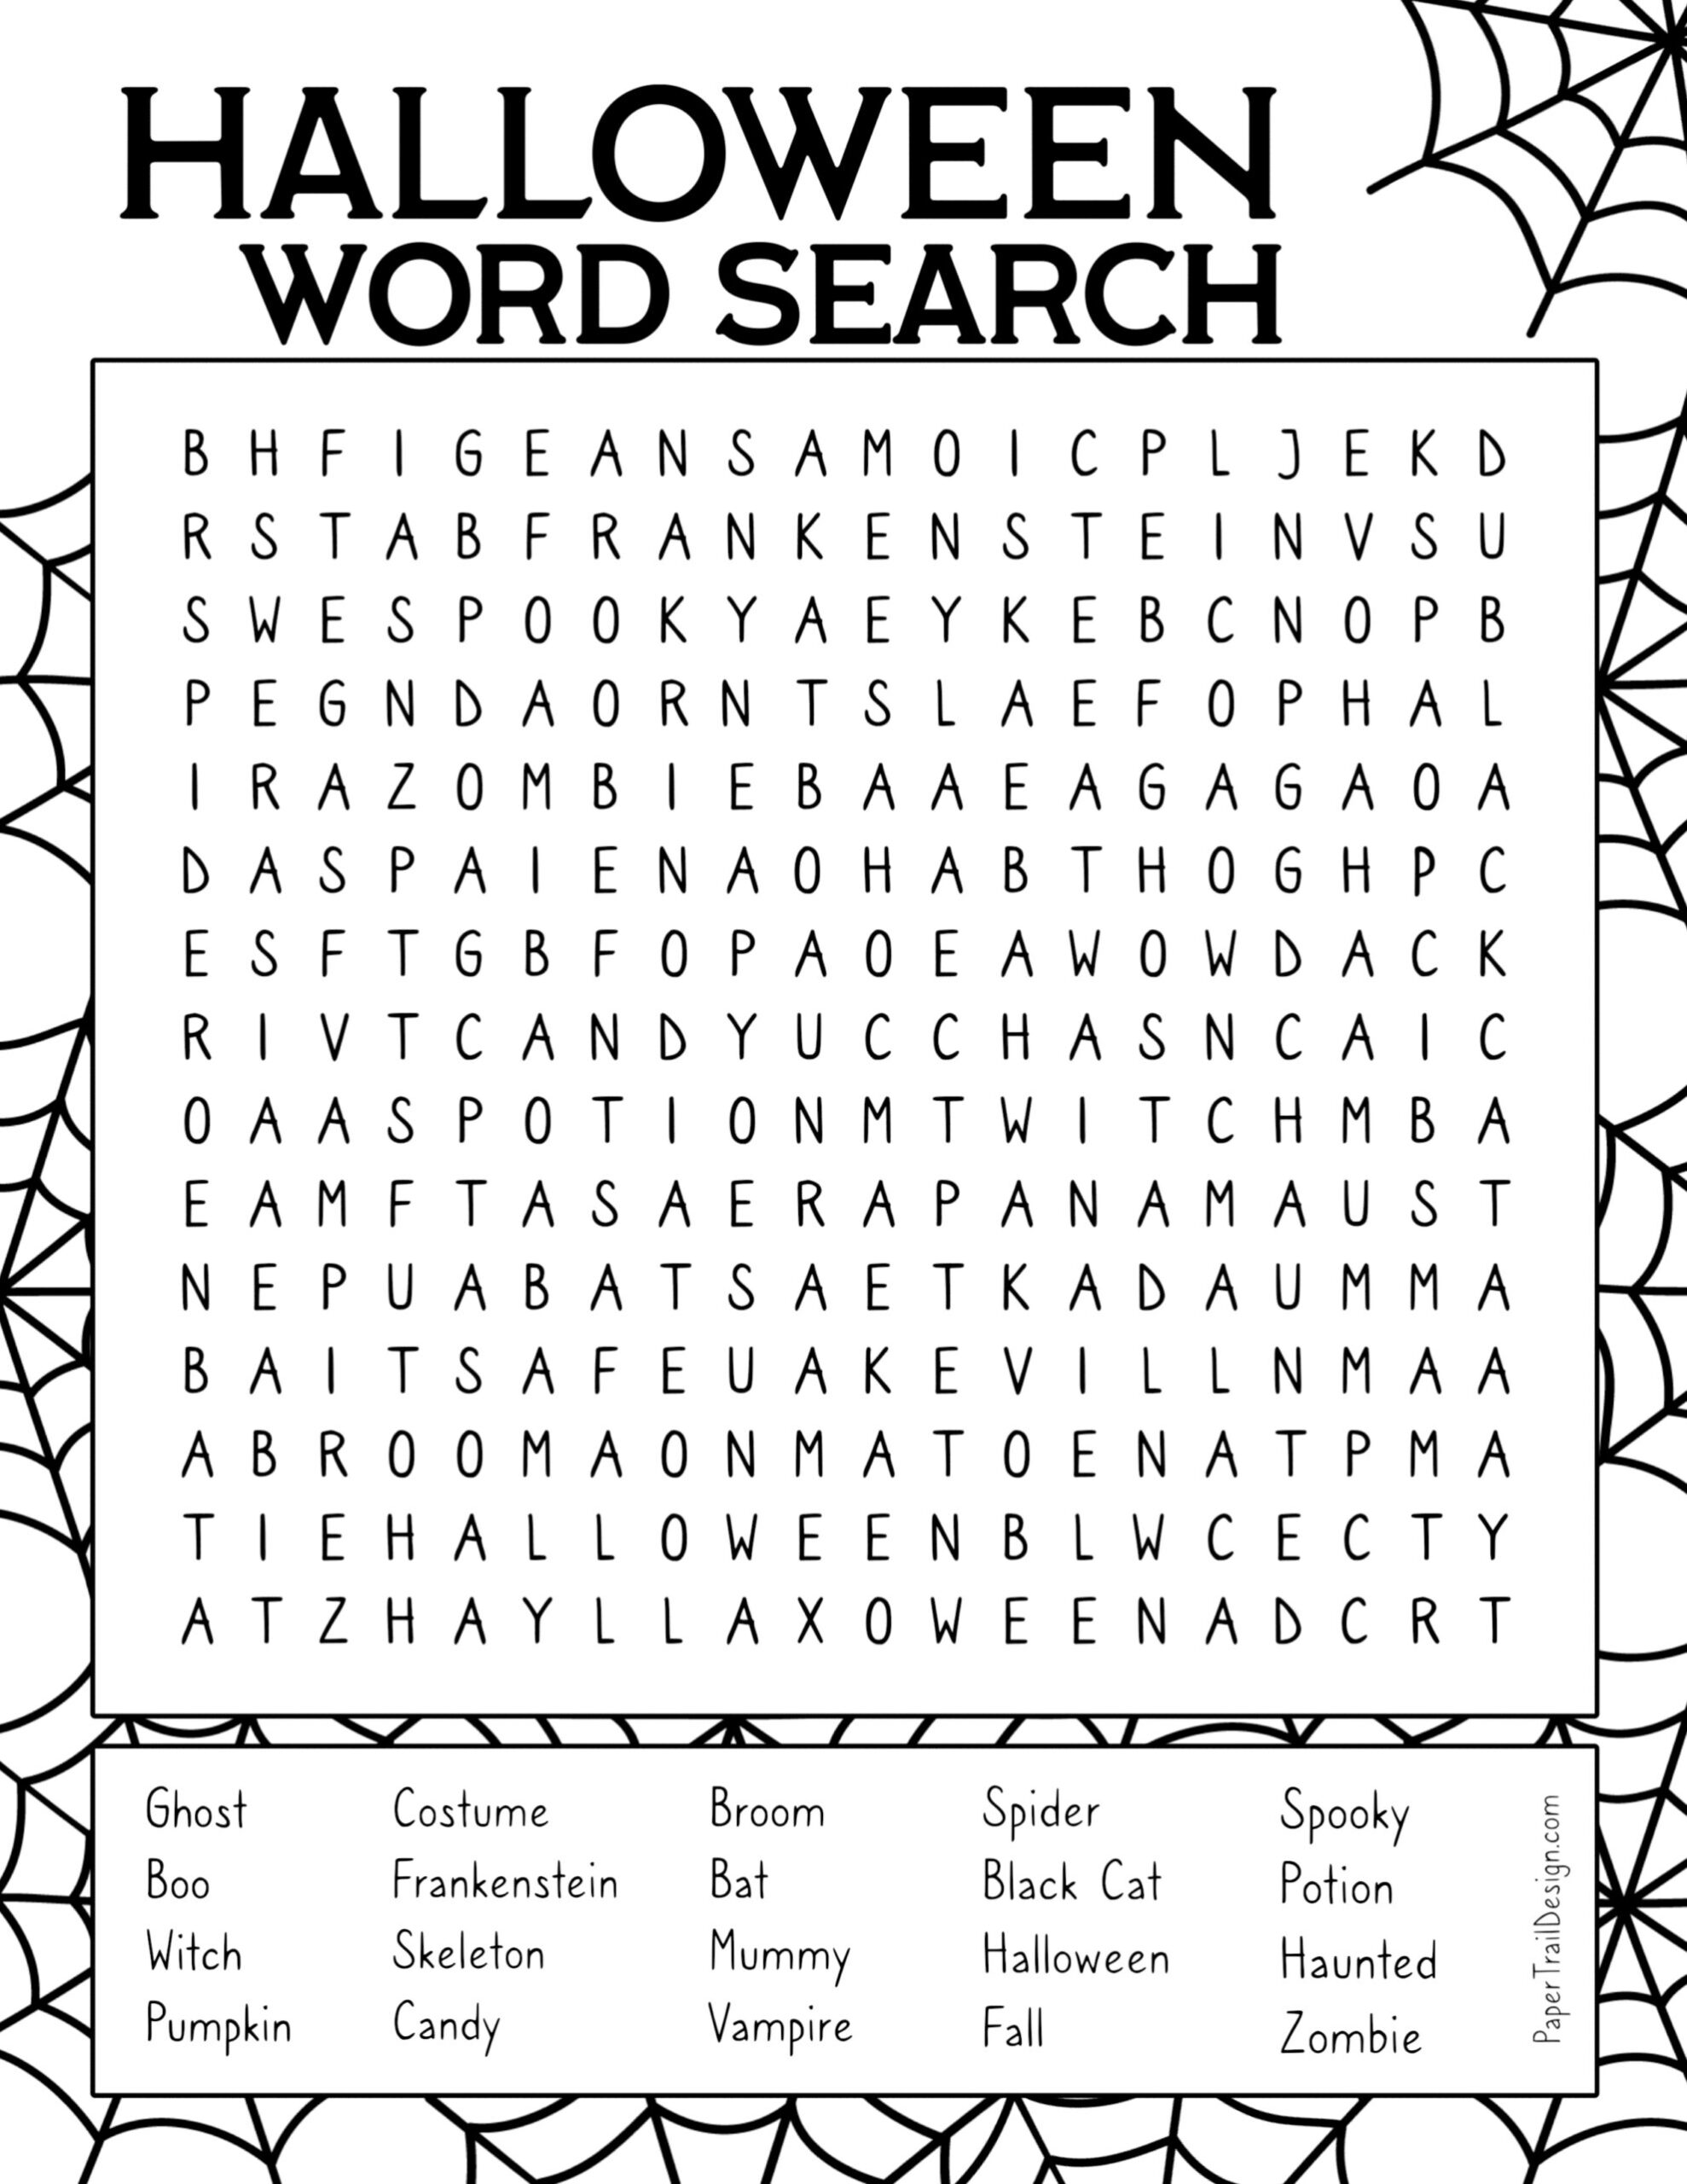 Free Printable Halloween Word Search - Paper Trail Design throughout Free Printable Halloween Word Search